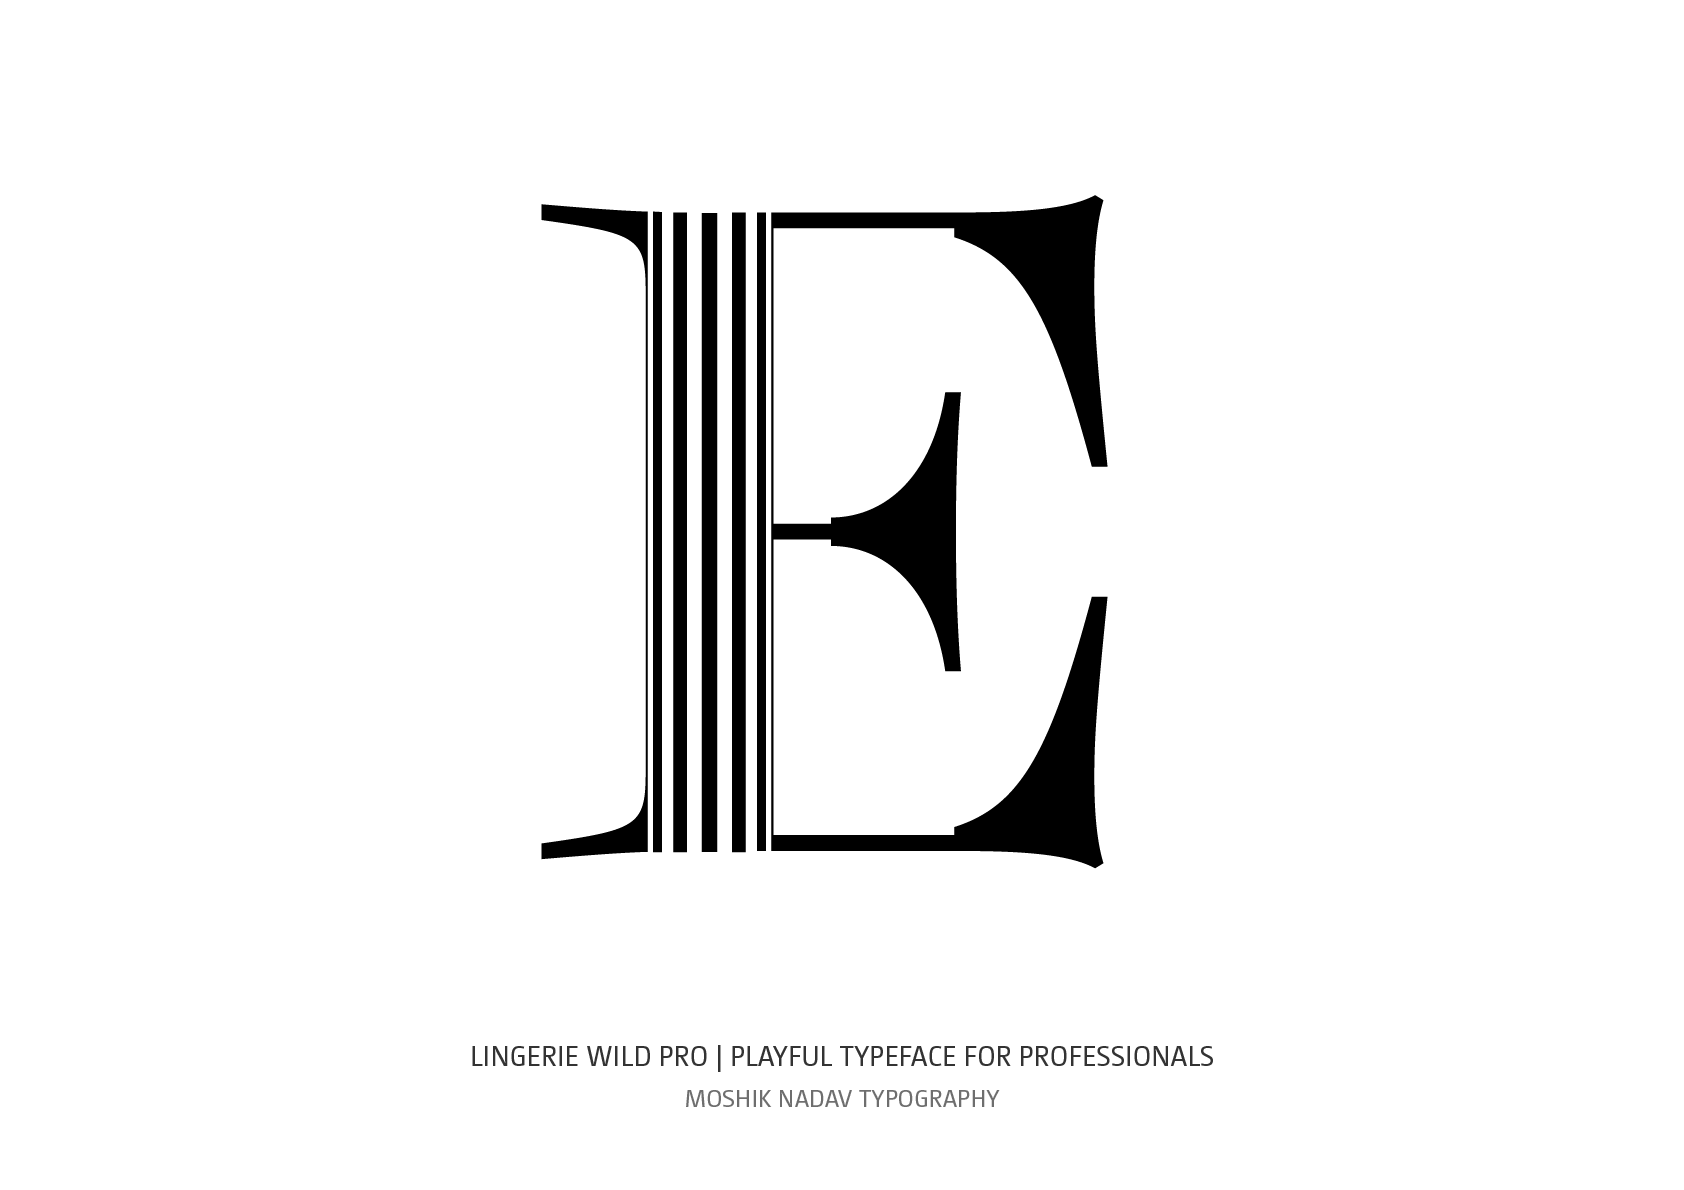 Uppercase E made with Lingerie Wild Pro Typeface font for logo design and fahion magazine layout by Moshik Nadav Typography